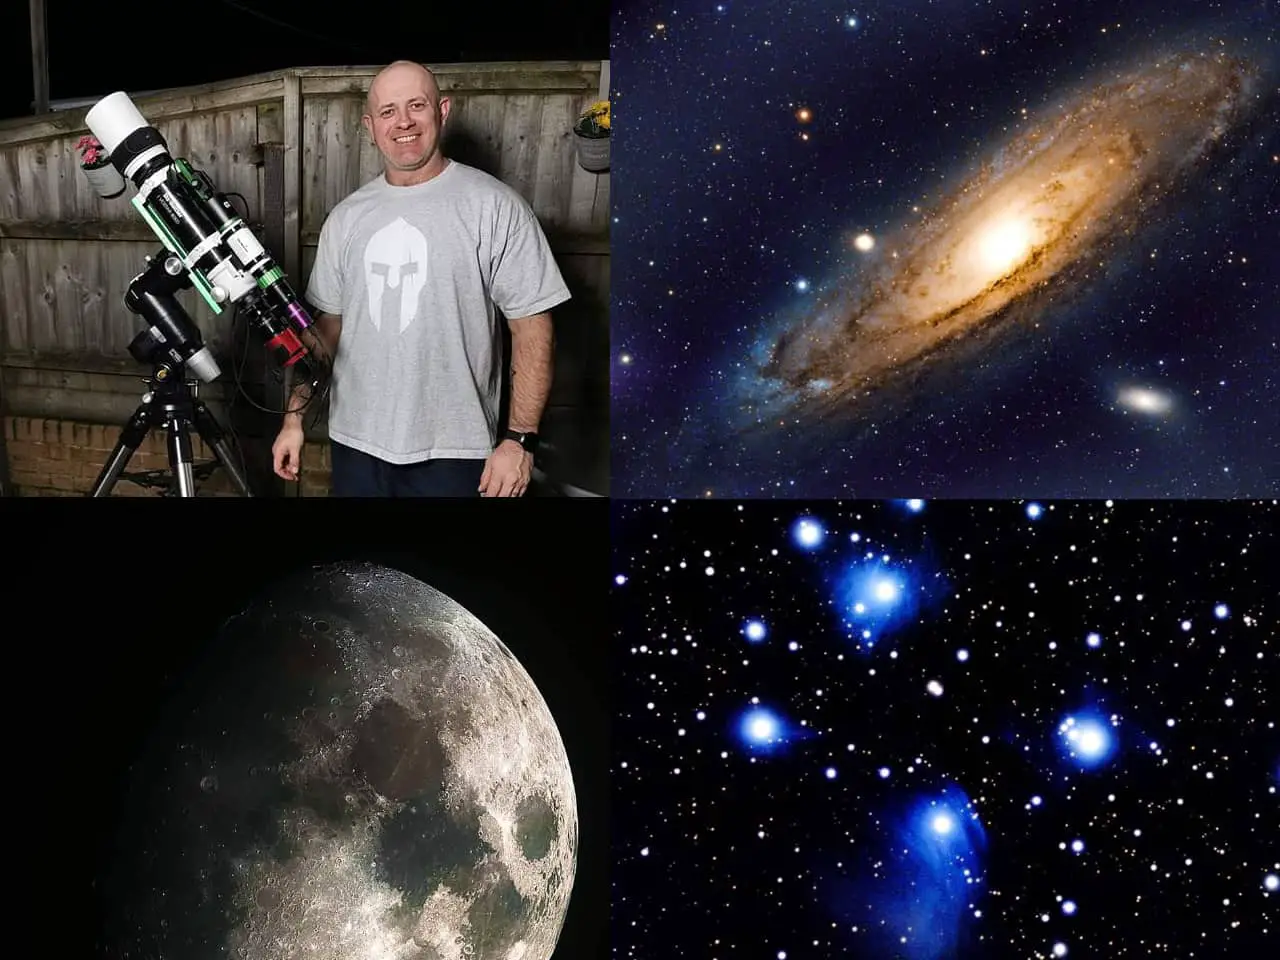 Kevin Power in his garden with his telescope and images from outer space